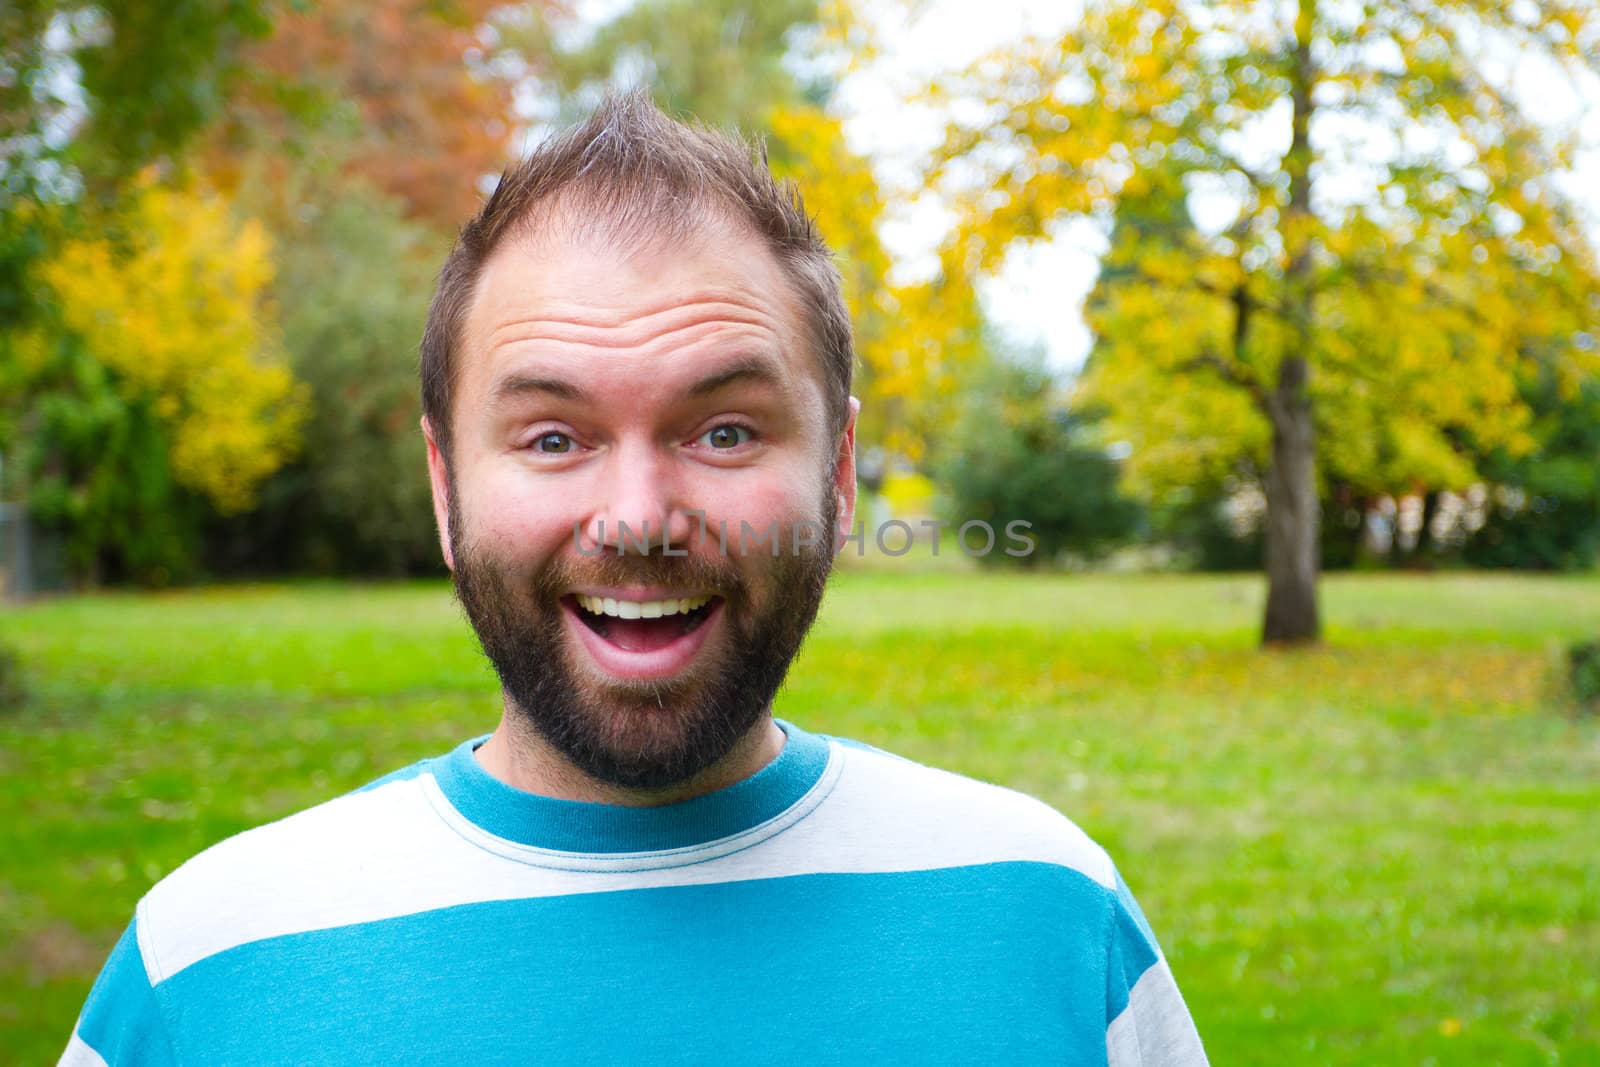 A portrait of a smiling man with a full beard outdoors in a park setting.